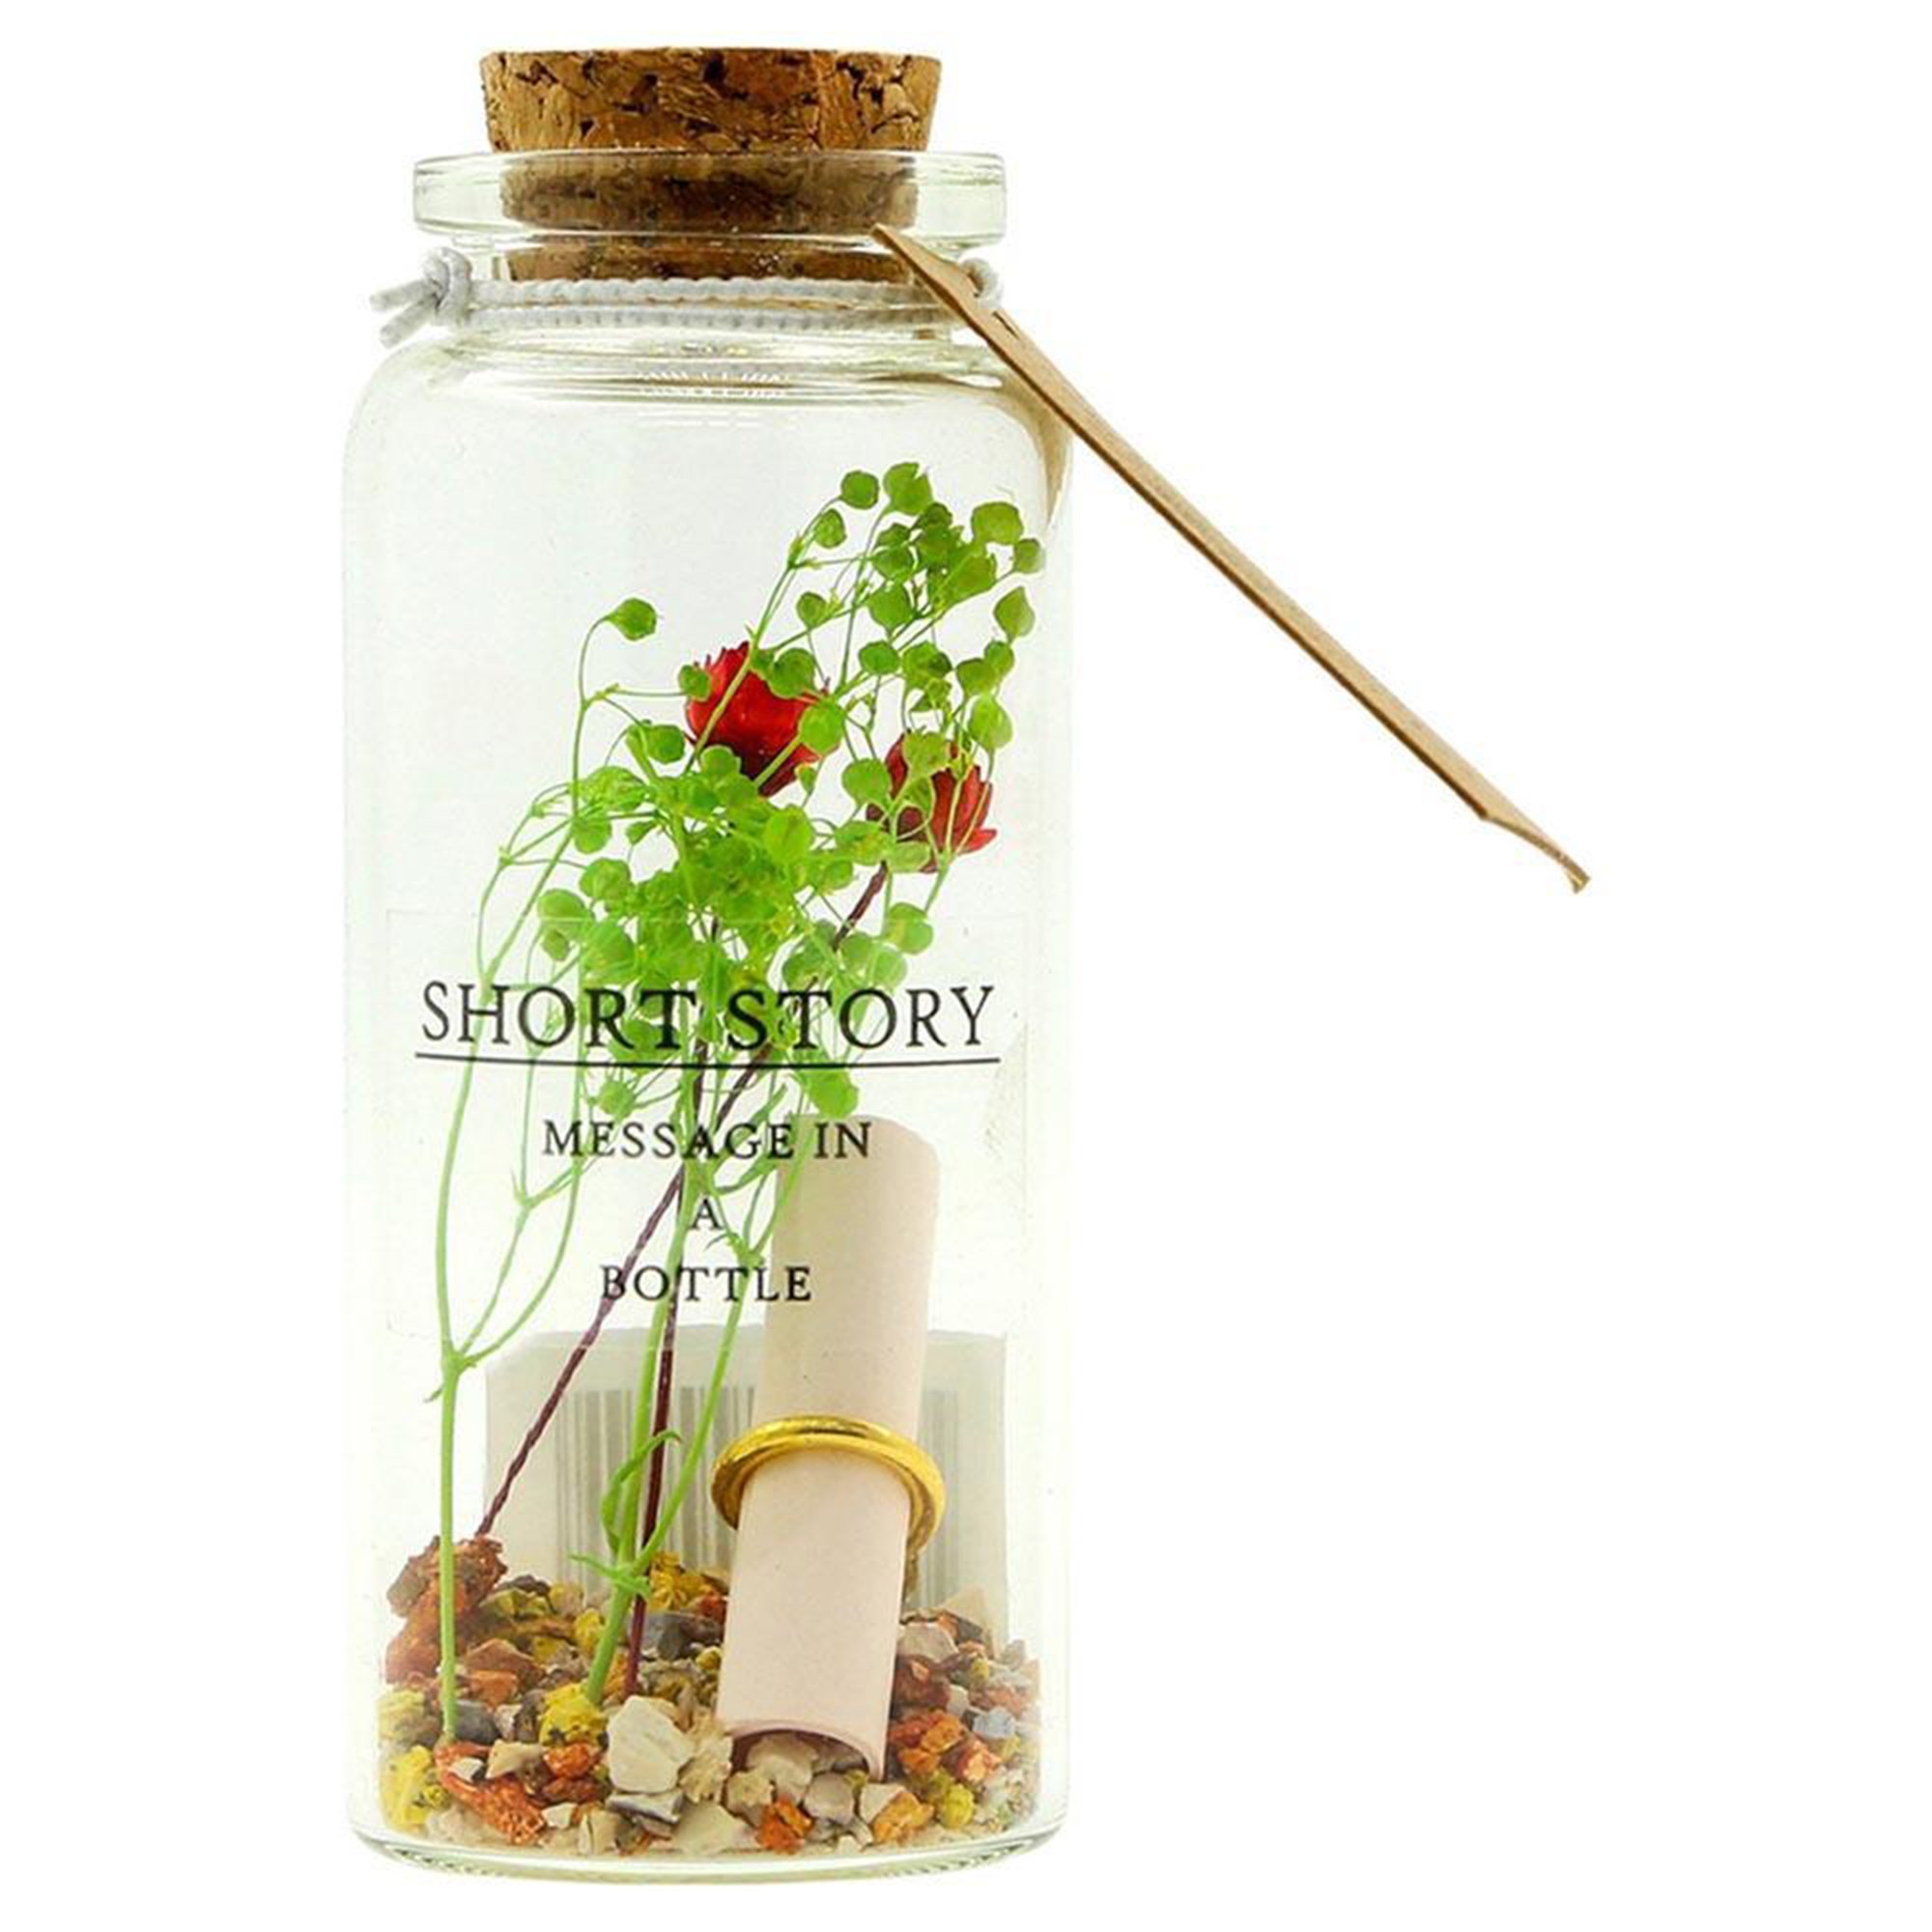 11.YELLOW OCTOPUS Rose Garden Write &amp; Gift Message In A Bottle €11.52,